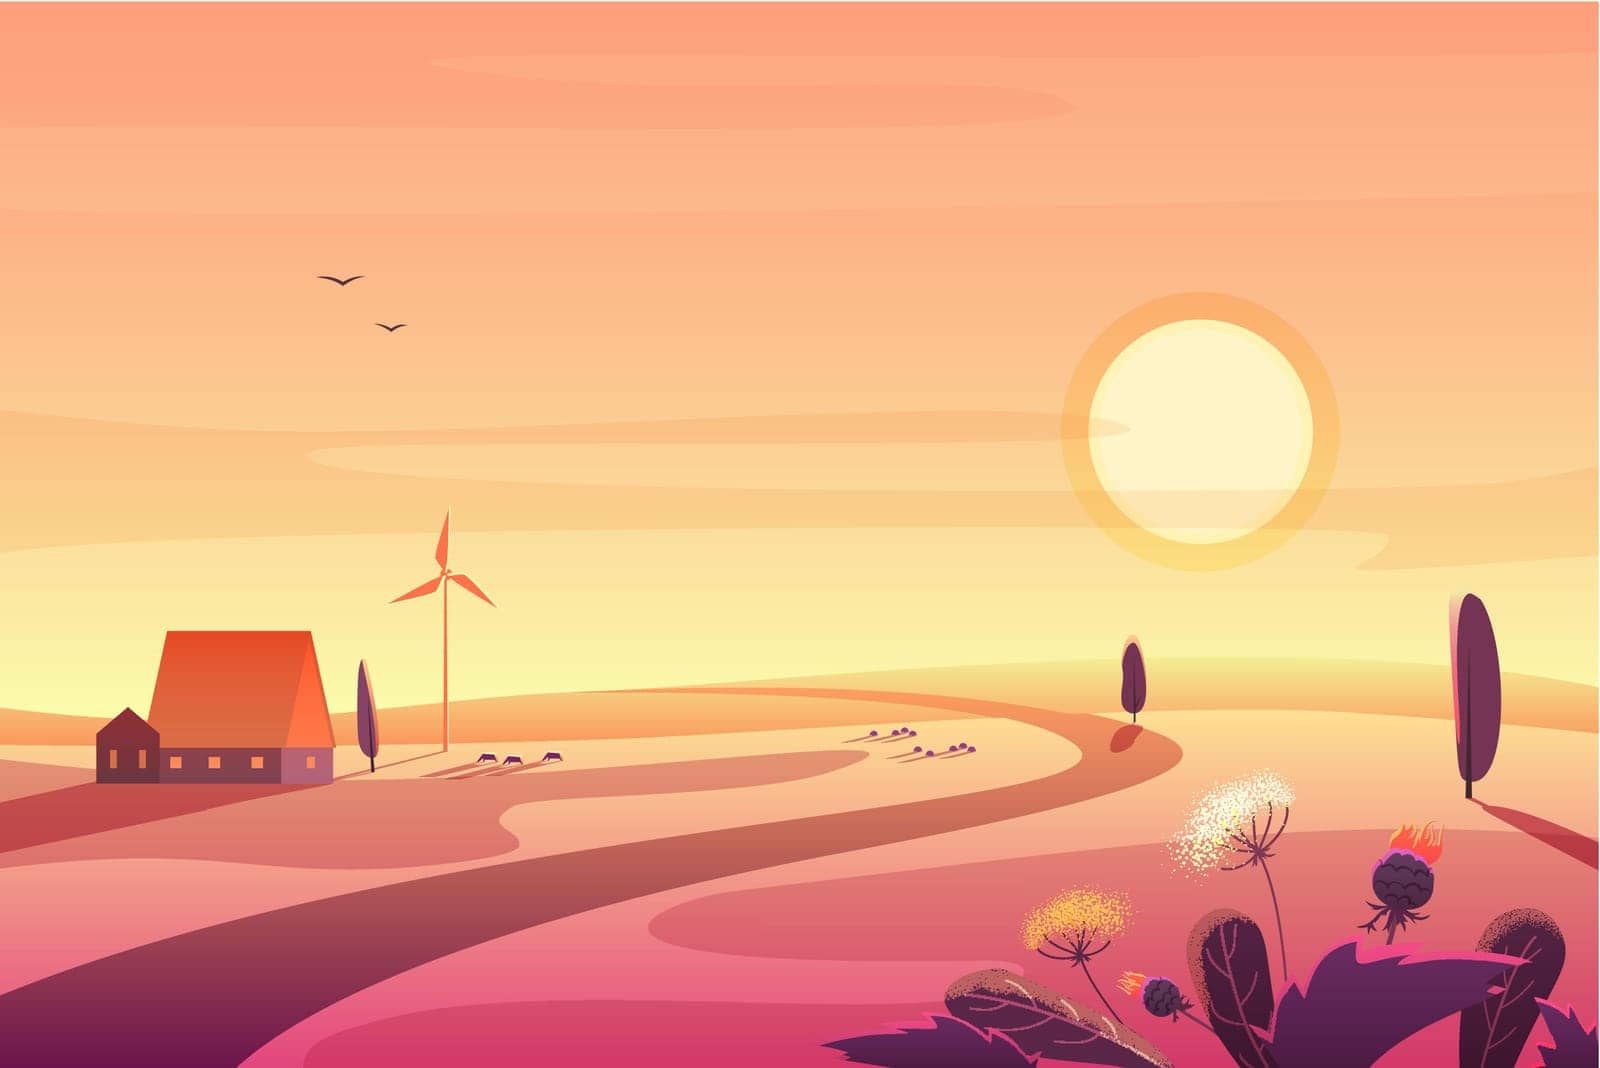 Solar rural landscape in sunset with hills, small house, wind turbine vector illustration